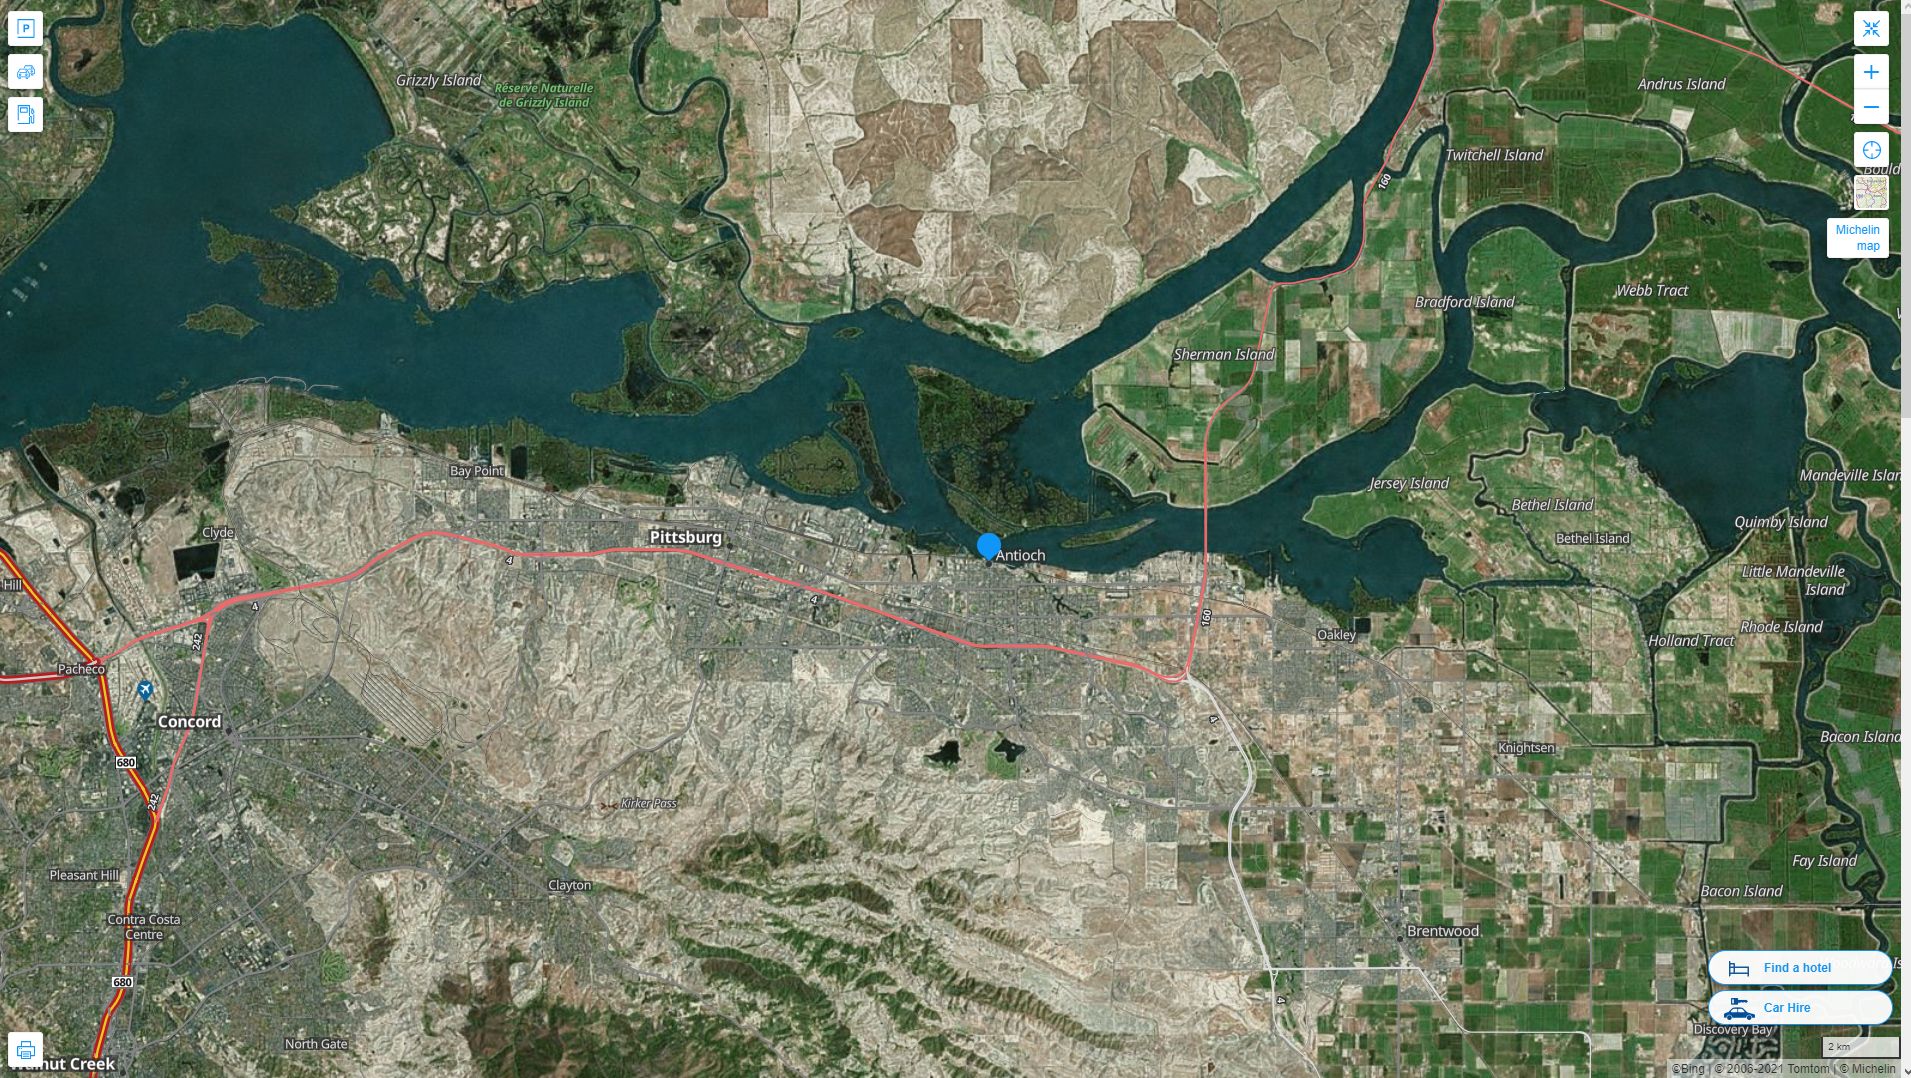 Antioch California Highway and Road Map with Satellite View